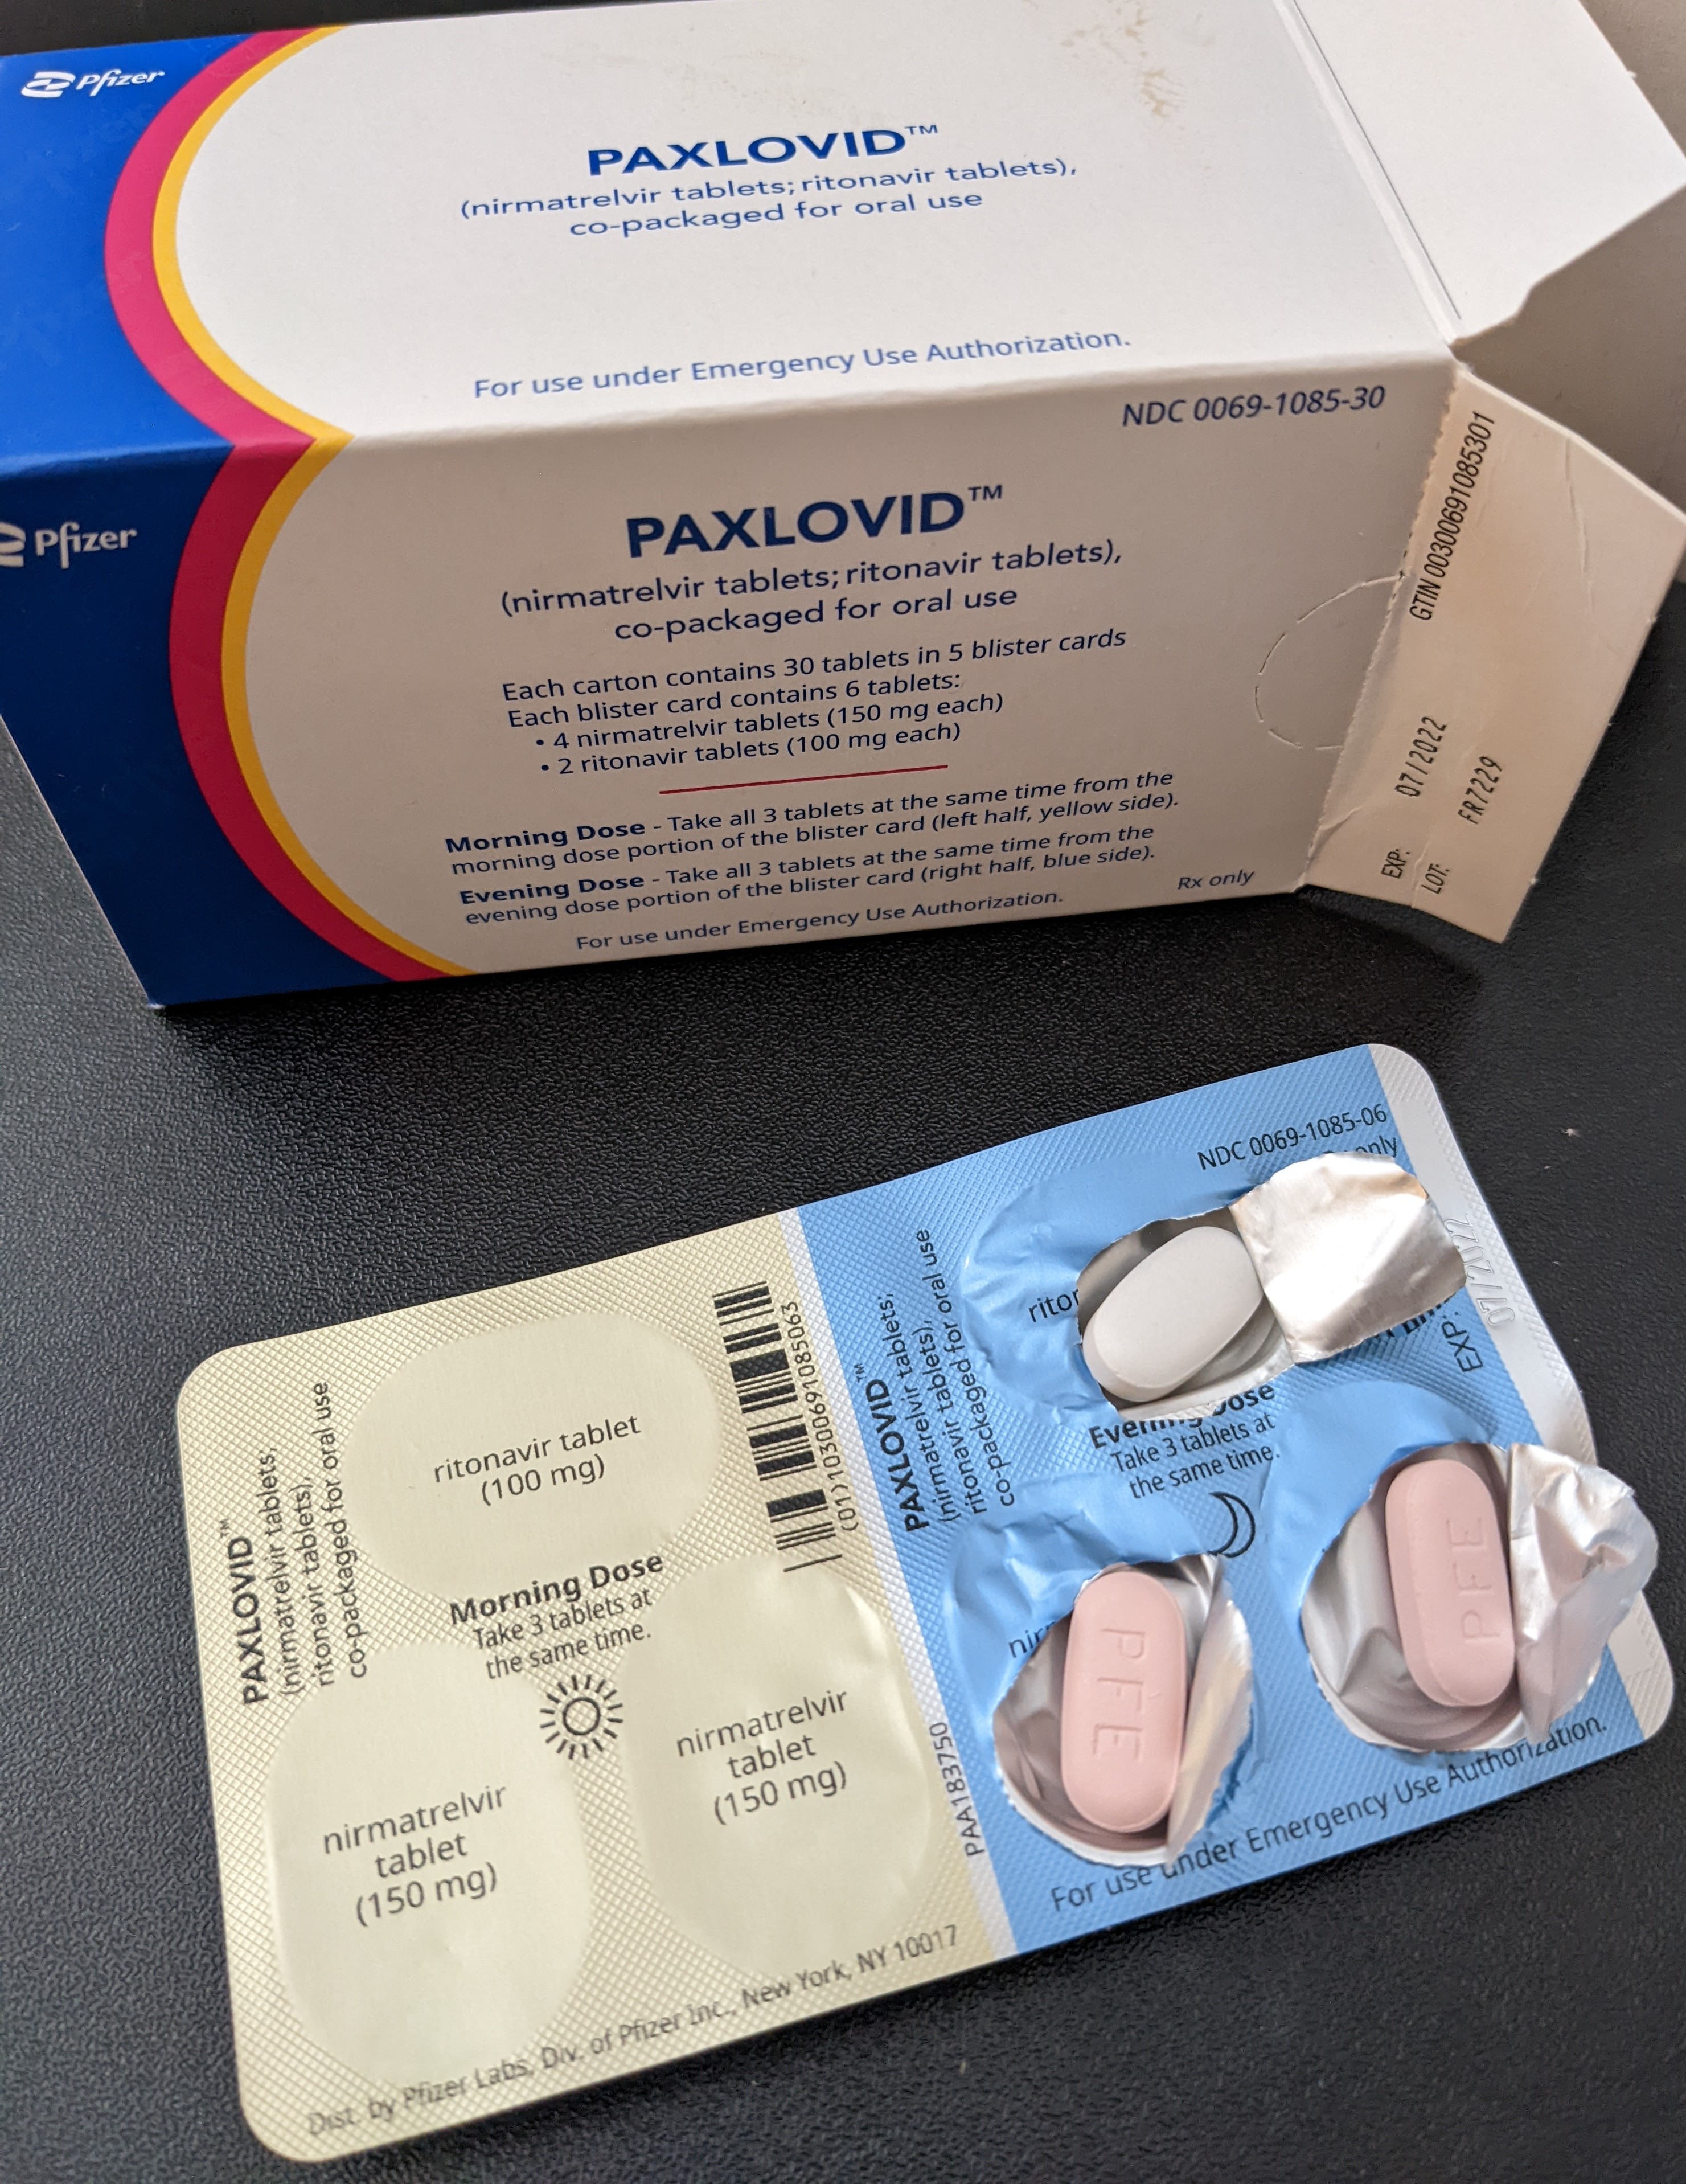 Over 20% Covid-infected people taking Paxlovid experience viral rebound: Study